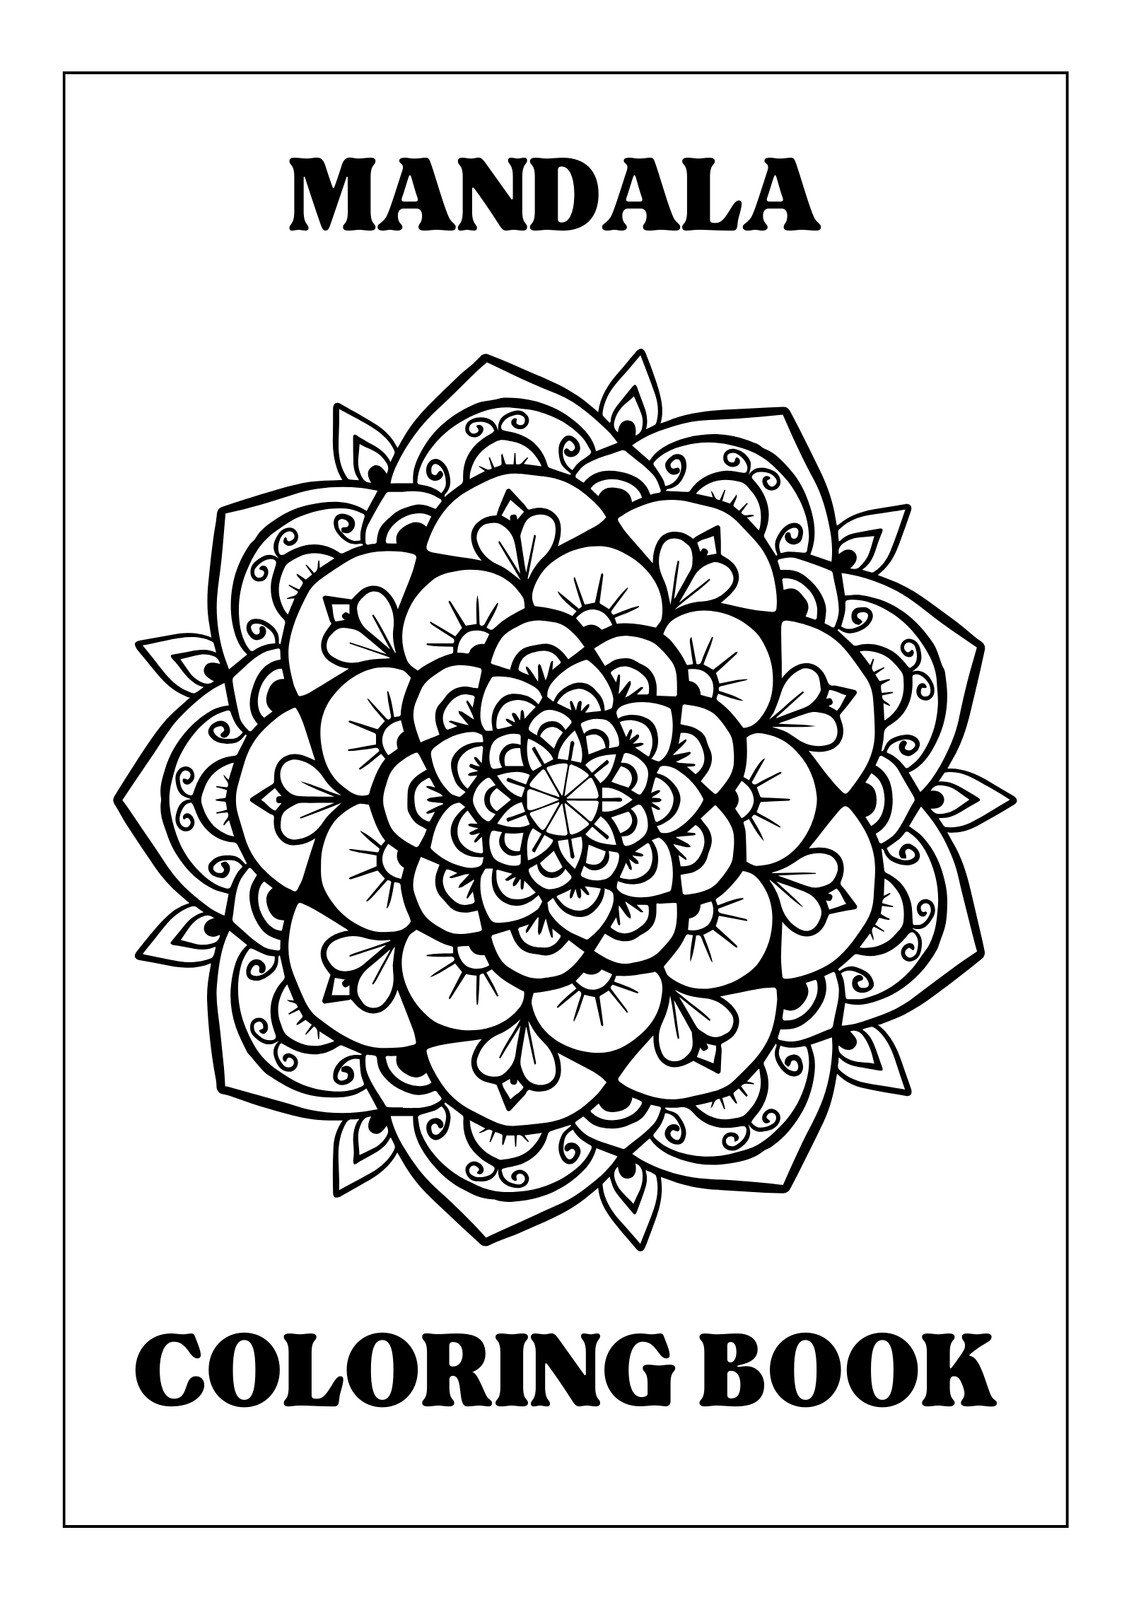 Creative and Tech-Free Fun for Kids with Personalized Coloring